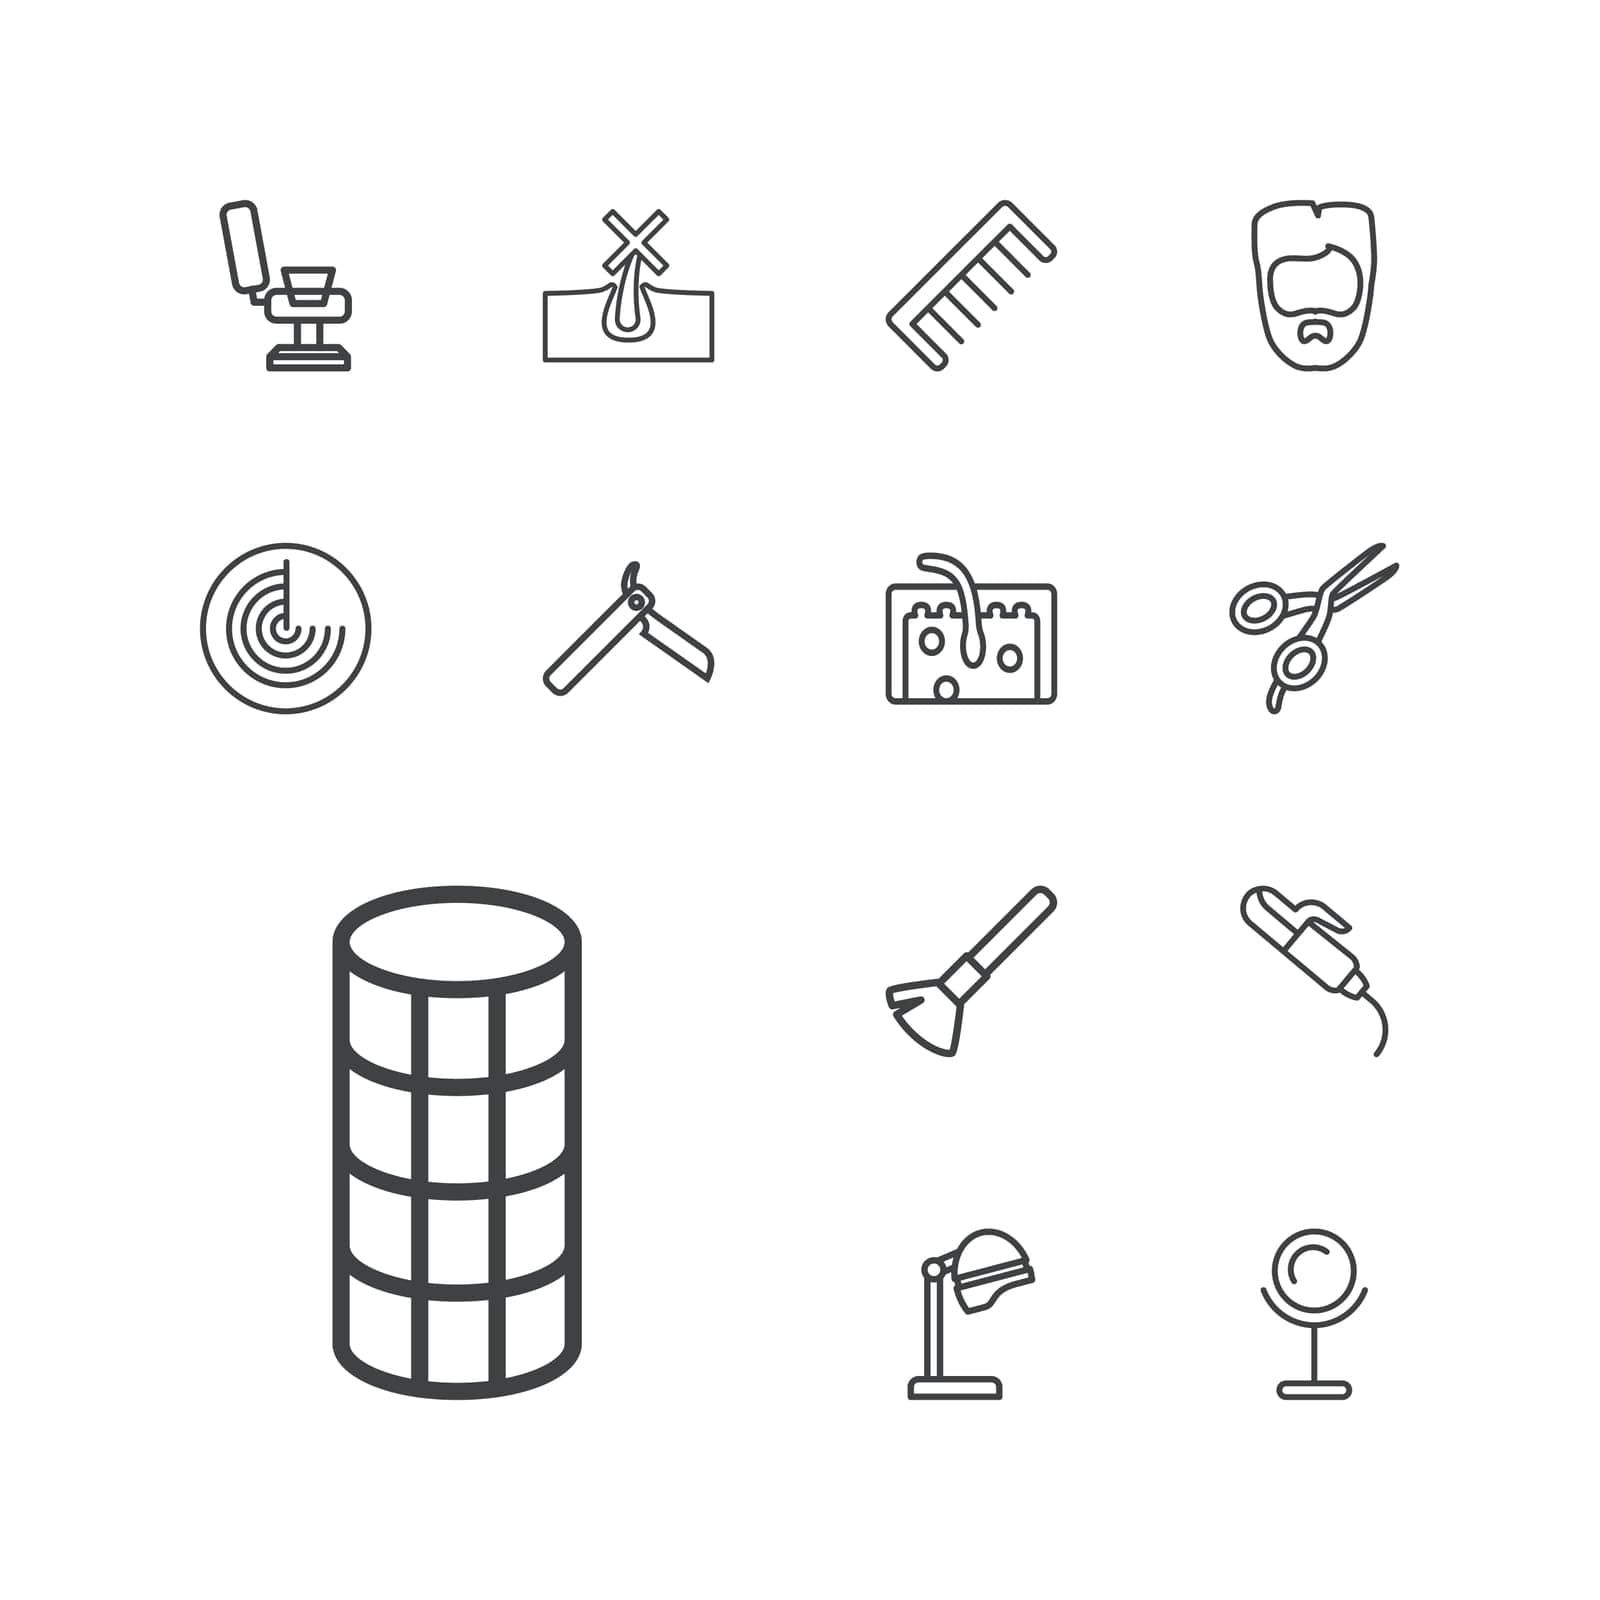 symbol,no,mirror,beauty,icon,sign,skin,isolated,curler,hair,hairdresser,white,design,vector,man,barber,bllade,brush,set,in,chair,black,equipment,shaving,haircut,tool,dryer,comb,hairstyle,scissors,radar,style,razor,illustration,object,fashion,care,salon by ogqcorp